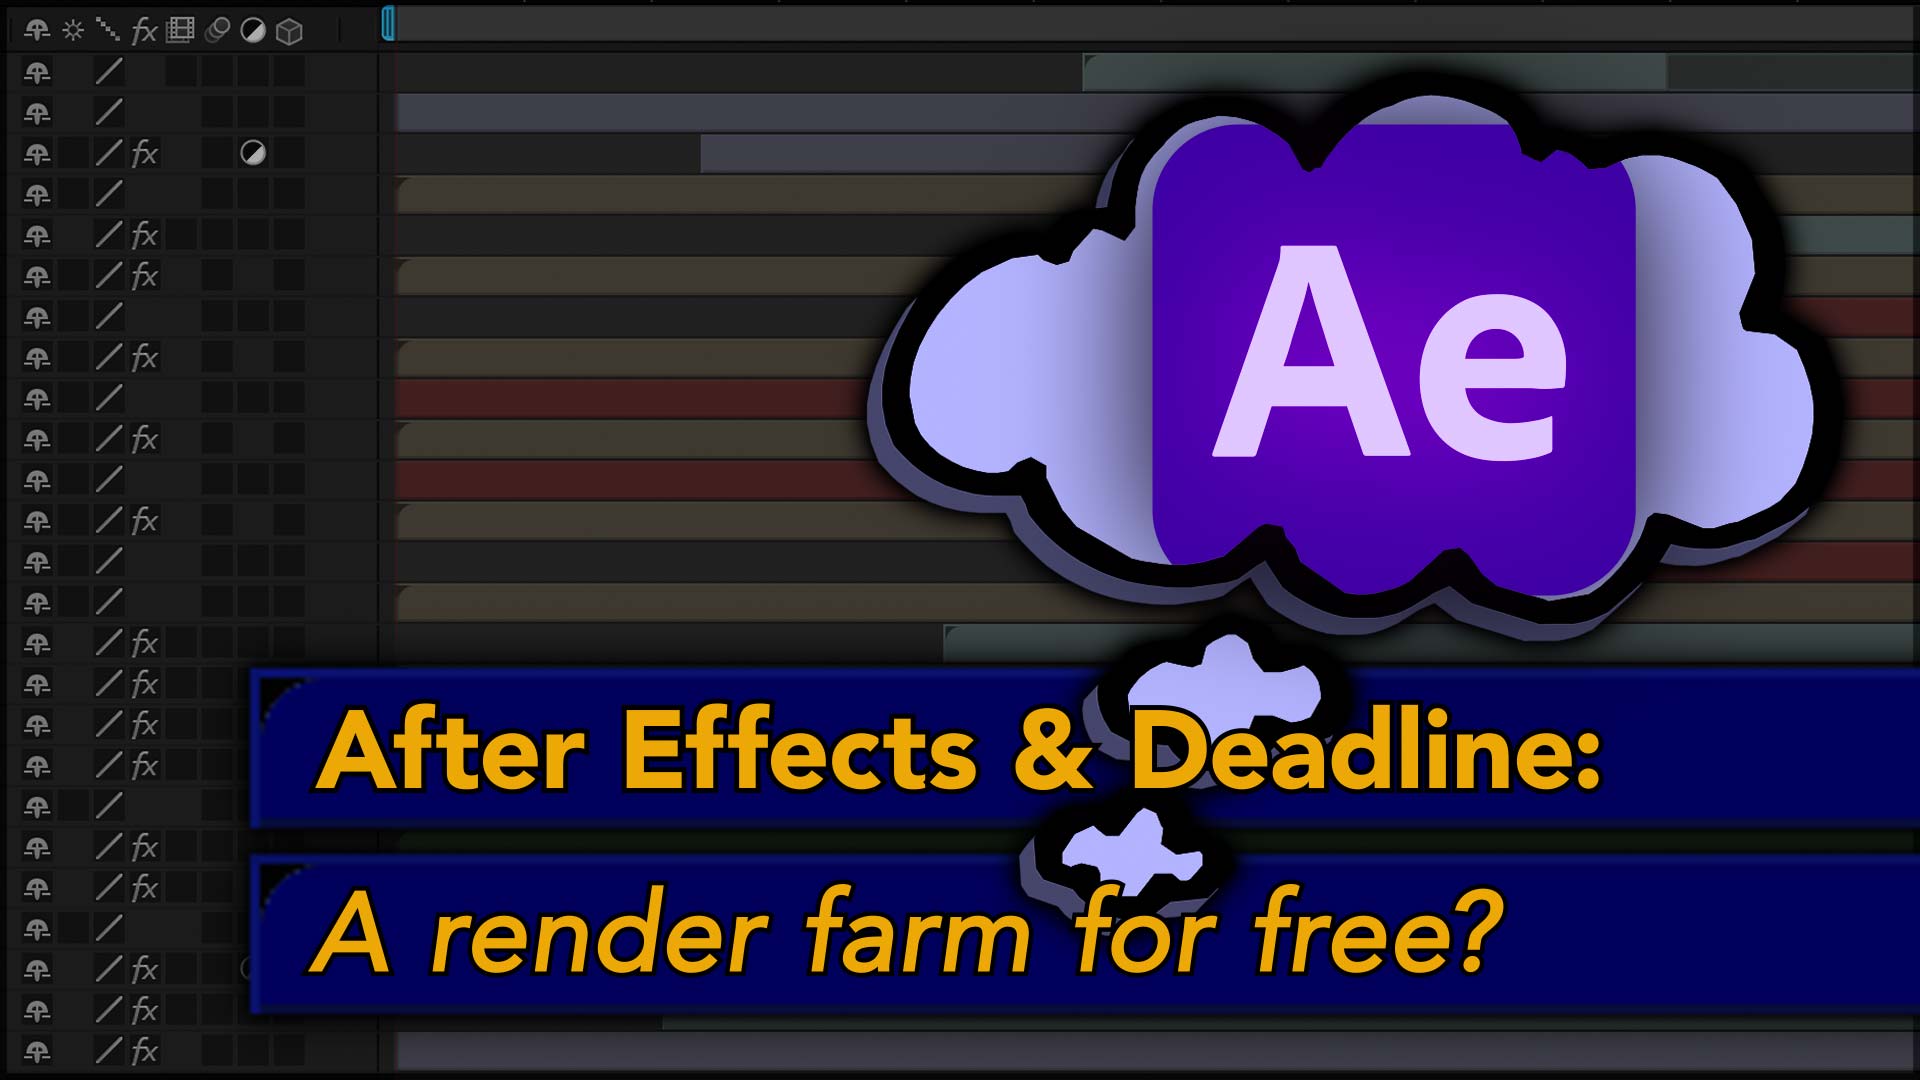 After Effects: Using Deadline for a Render Farm 71